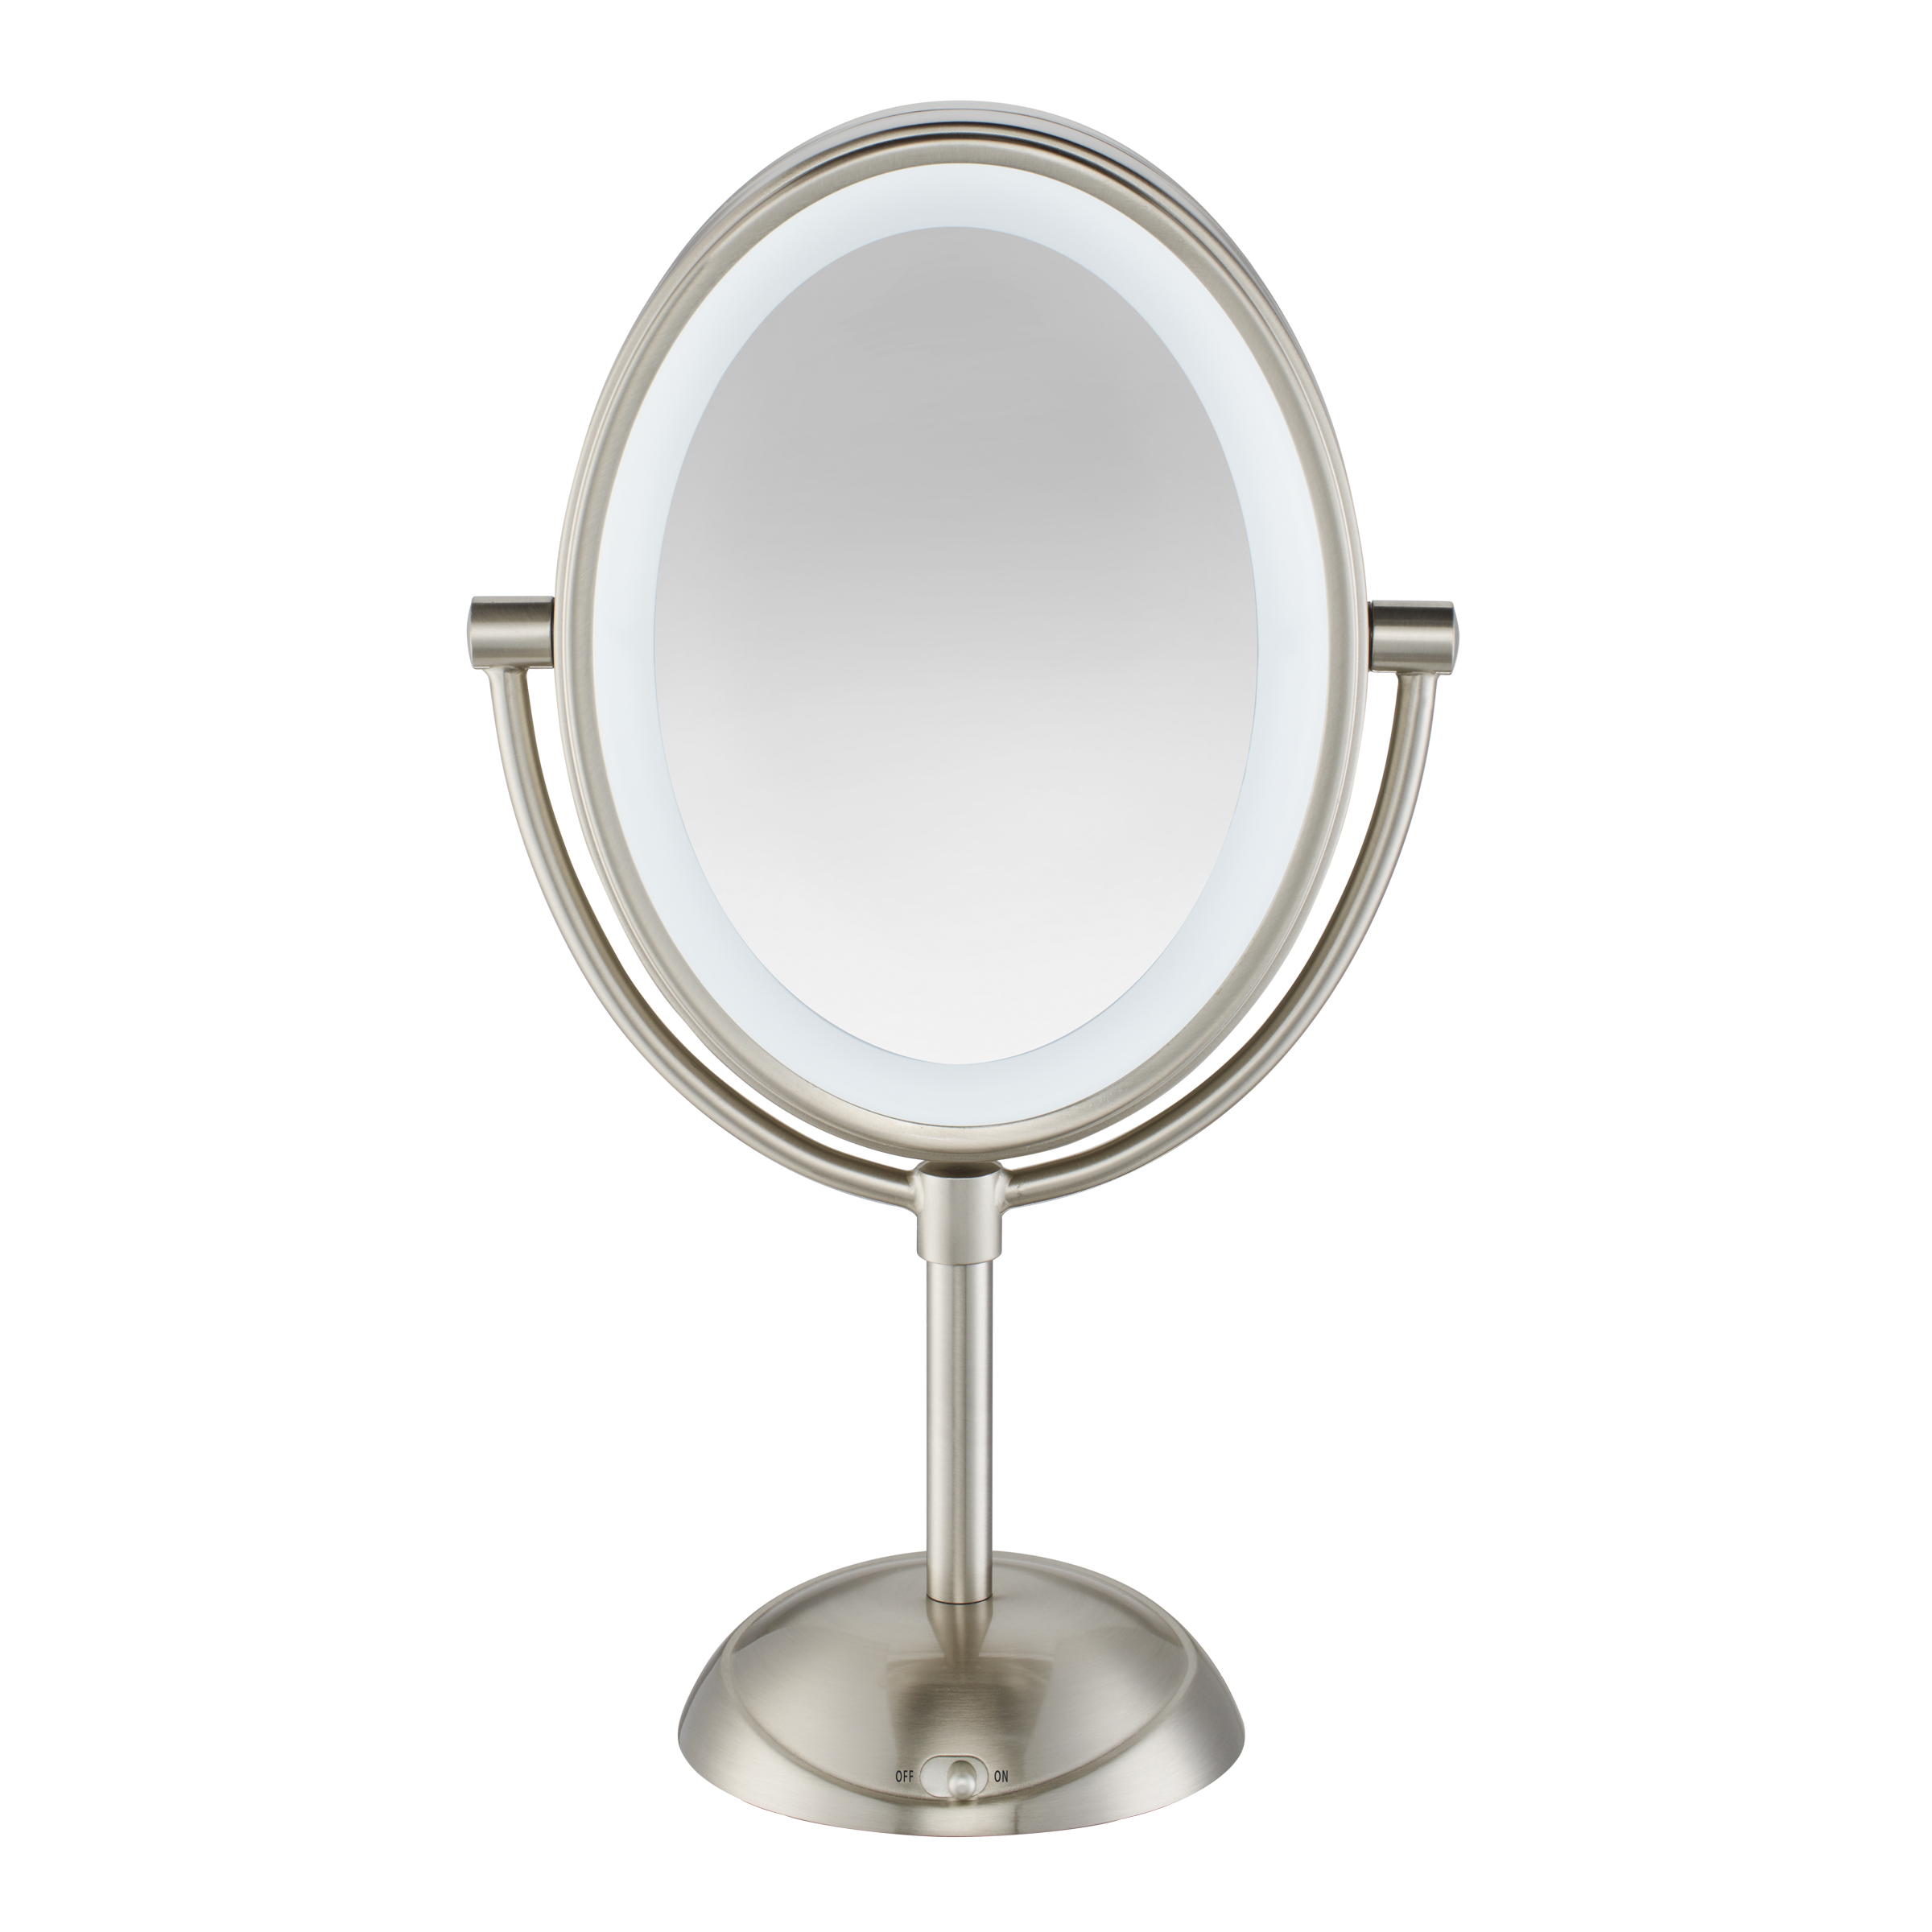 Conair Double-Sided Lighted Vanity Mirror with LED Lights, 1x/7x Magnification, Satin Nickel, BE157 - image 1 of 8